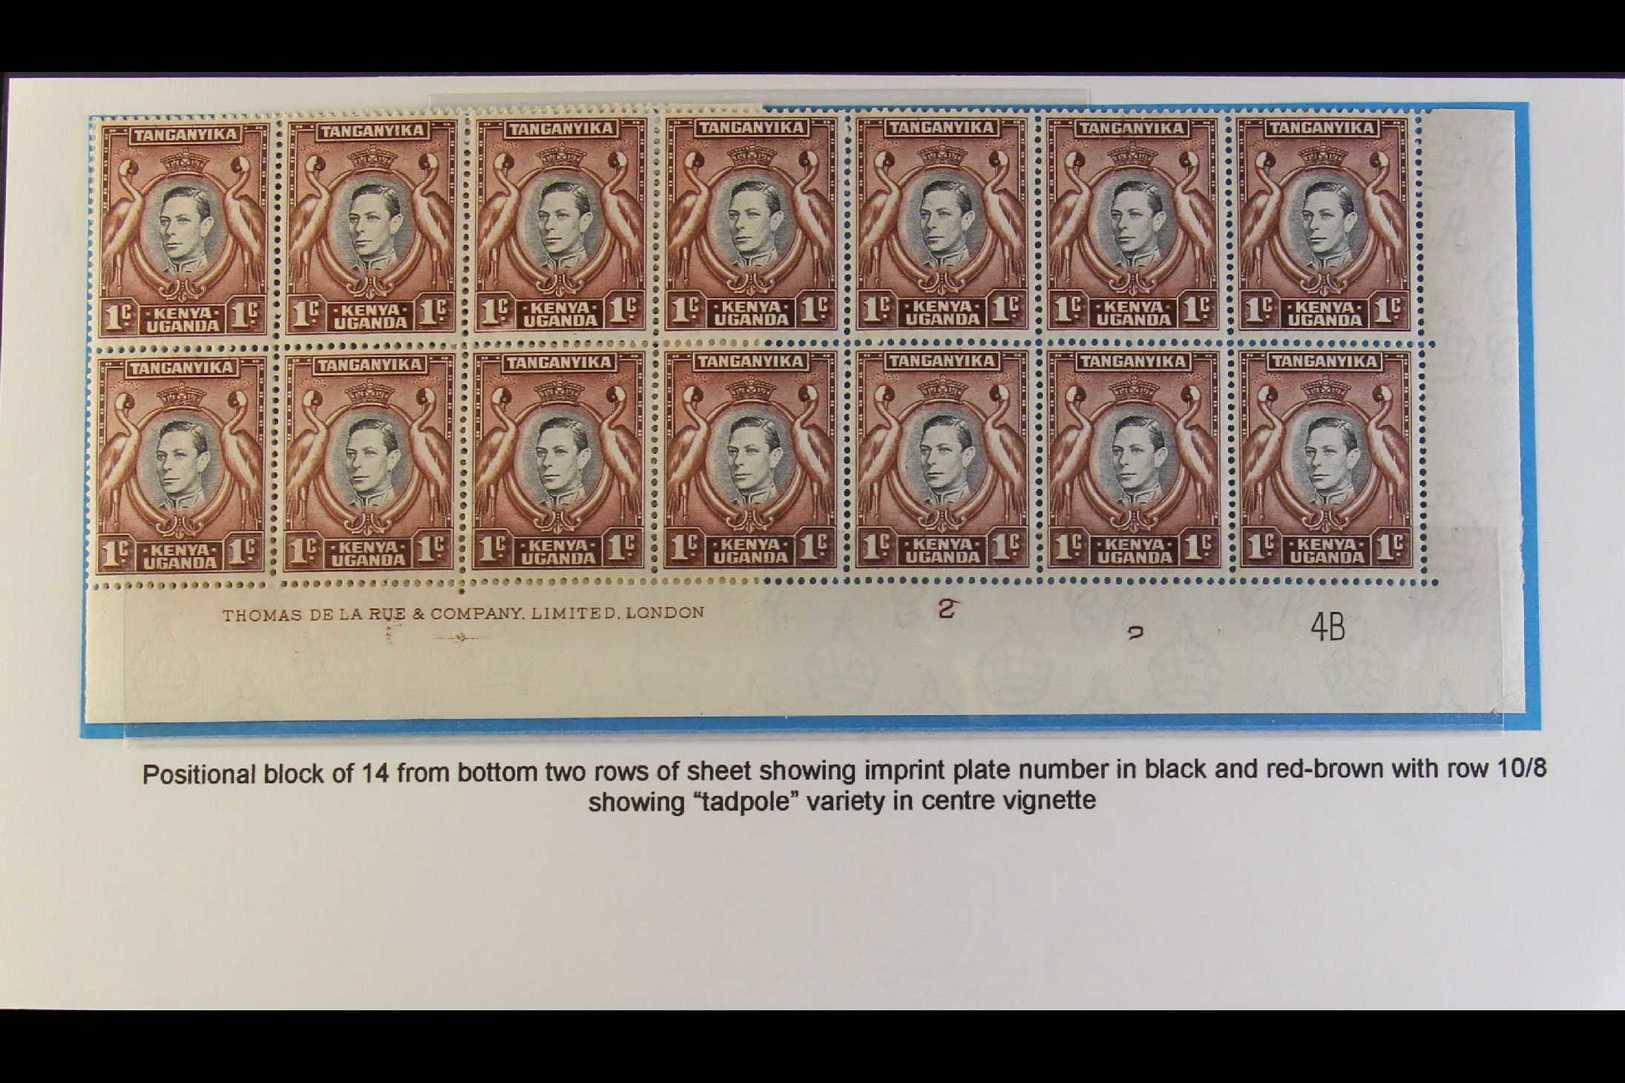 1942 1c Black And Chocolate Brown, Perf 13¼ X 13¾, SG 131, A Fine Never Hinged Mint Plate Block Of Twenty From The Botto - Vide